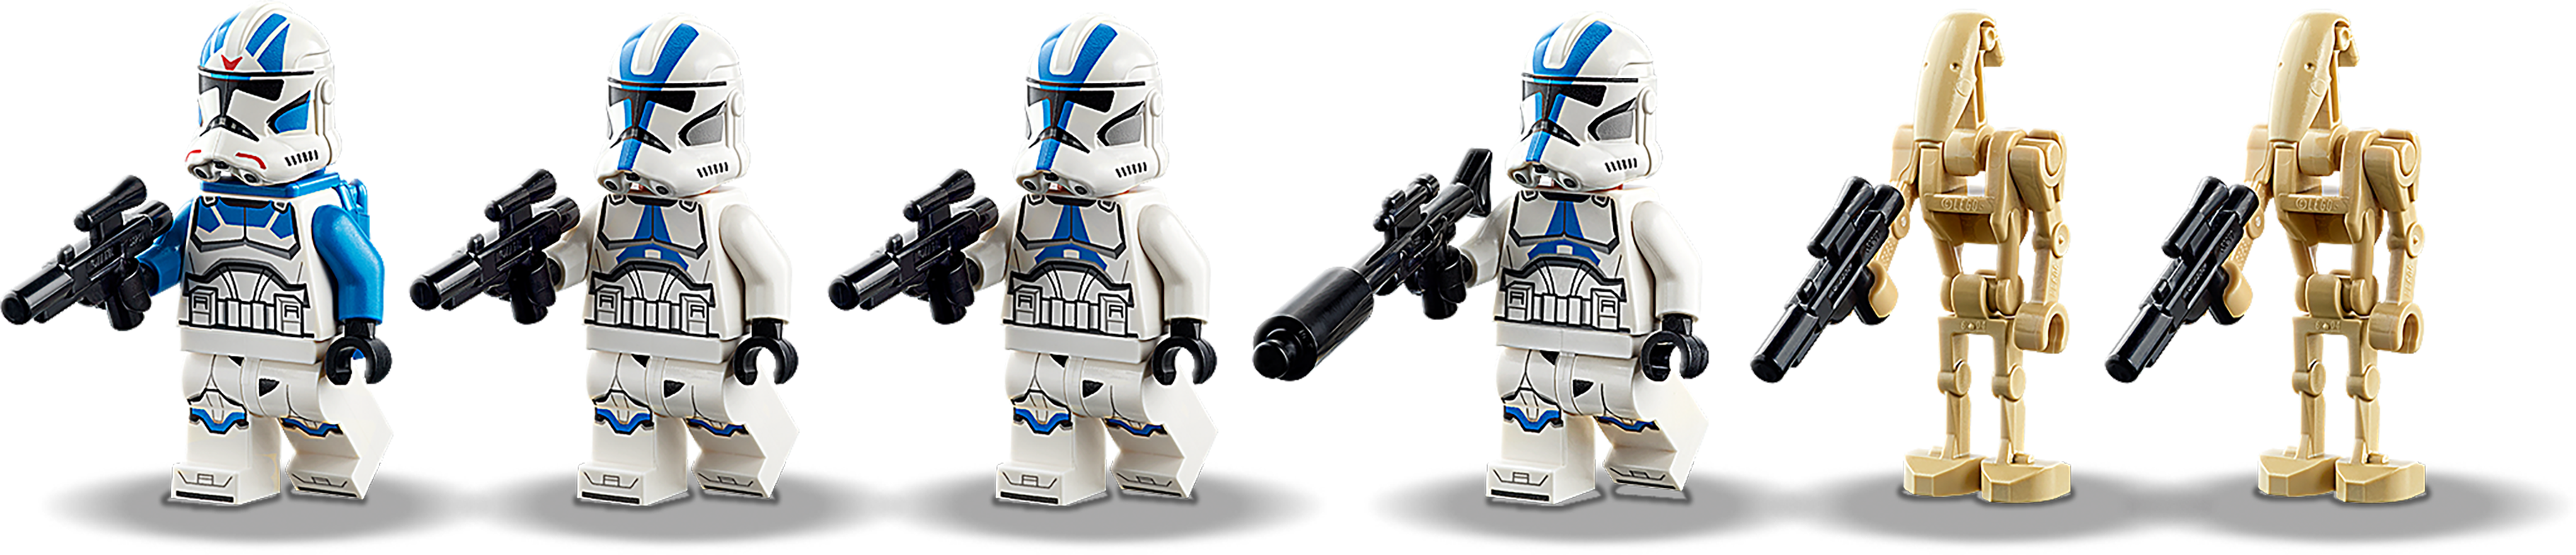 LEGO 501st Legion Clone Troopers Star Wars TM 75280 for sale online 